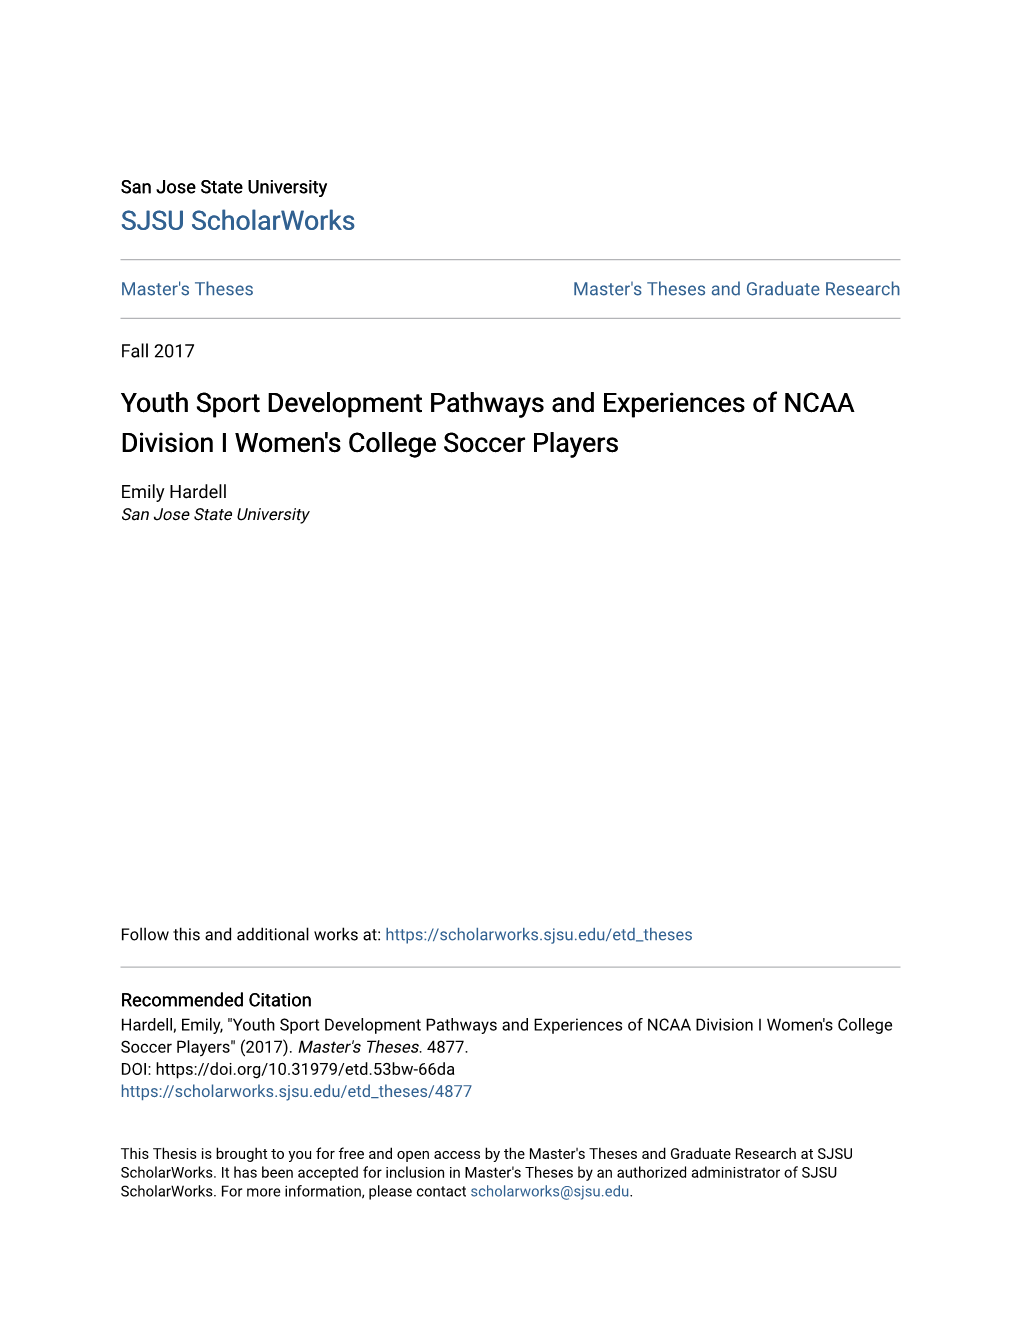 Youth Sport Development Pathways and Experiences of NCAA Division I Women's College Soccer Players